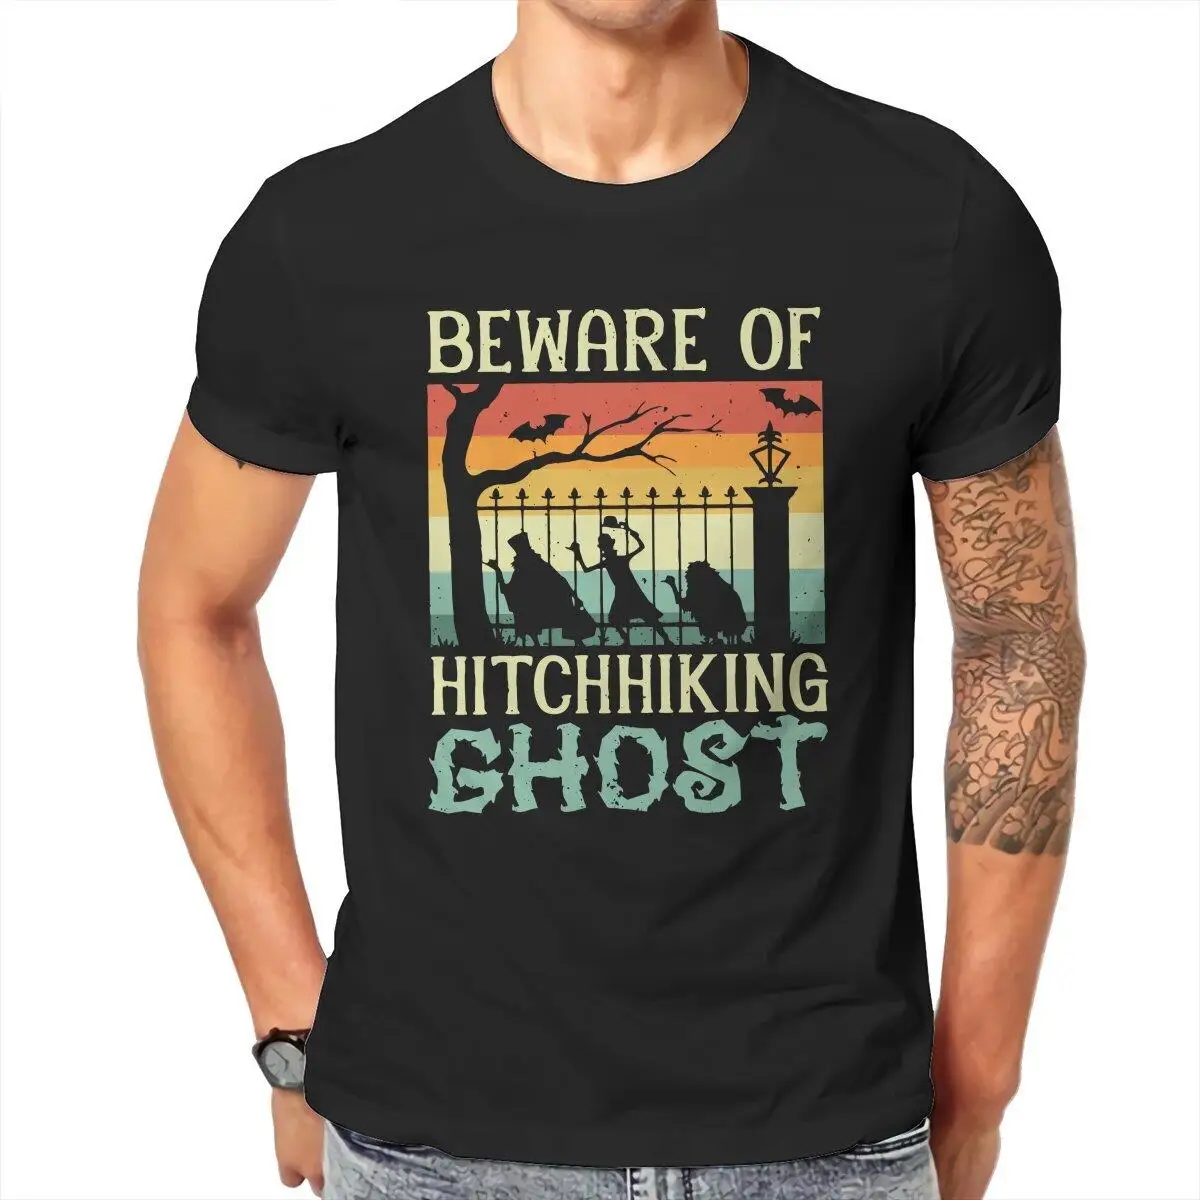 Beware Of The Hitchhiking Ghost T Shirt for Men Cotton for Male T-Shirts Halloween Trick Or Treat Tees Short Sleeve Clothing